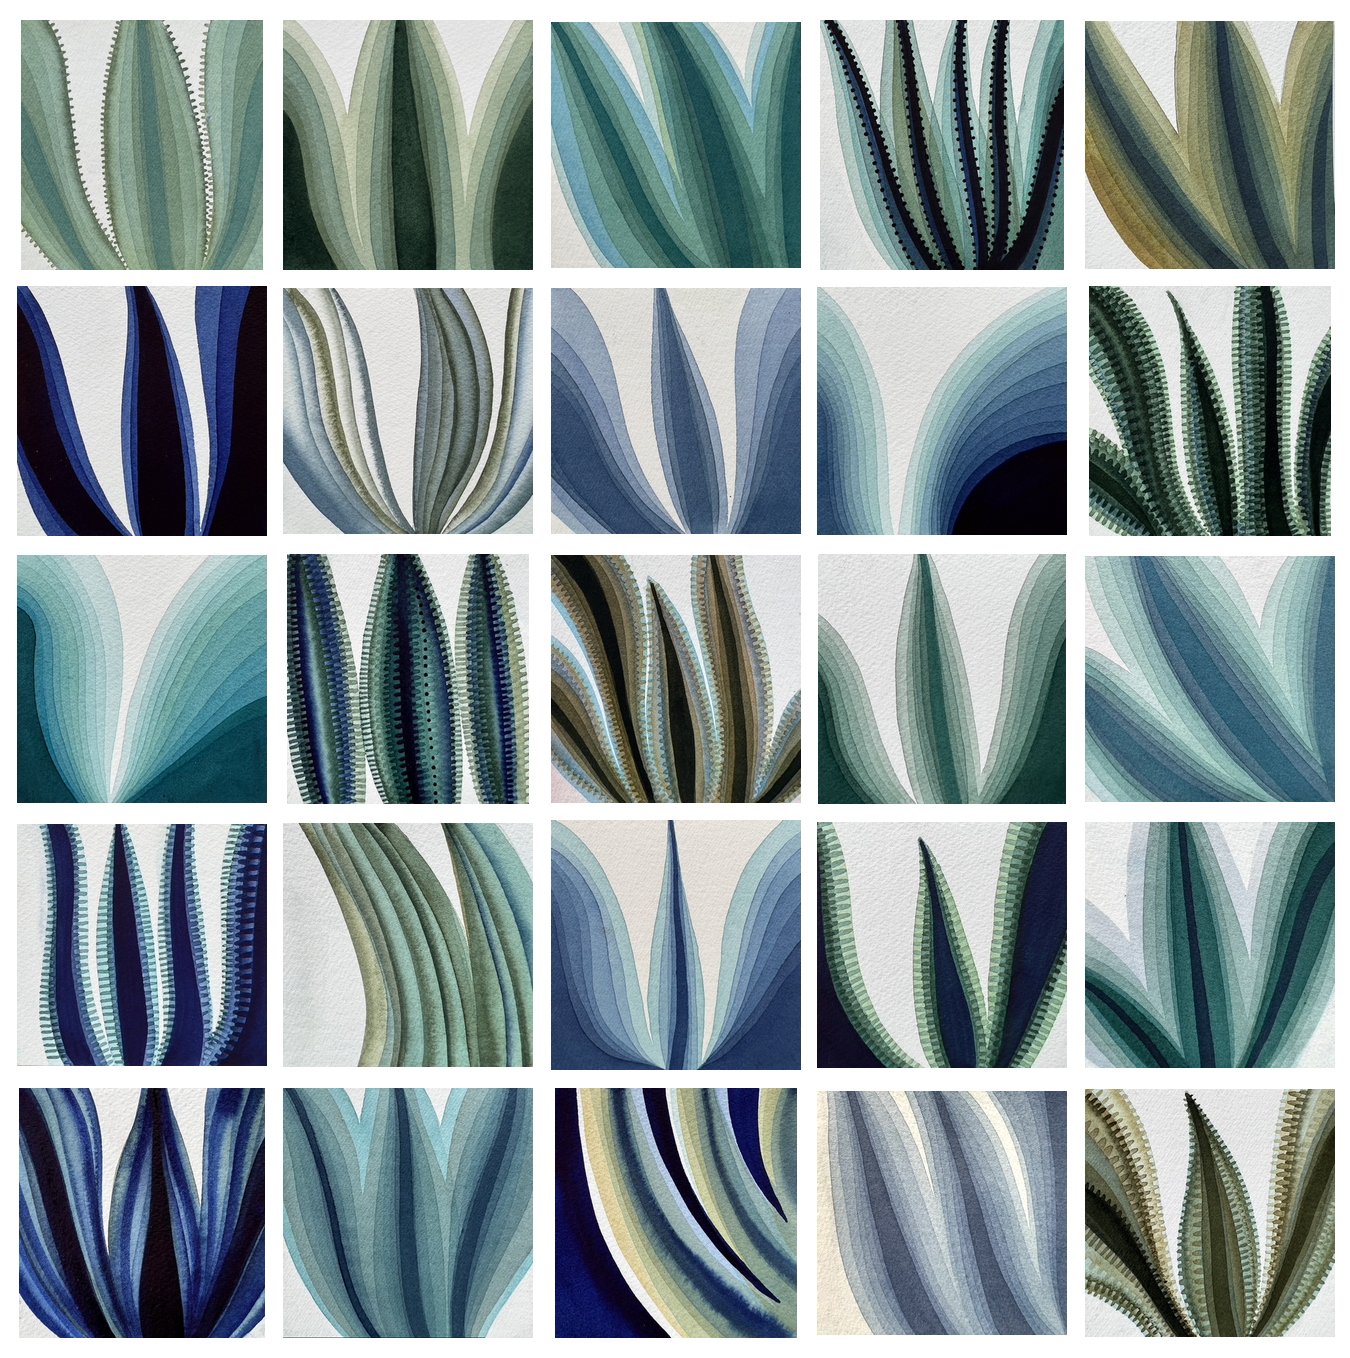 232835  SOLD- BlueAgave 1- 25- 4 x 4 Agave Watercolors $5,000 Unframed.jpeg